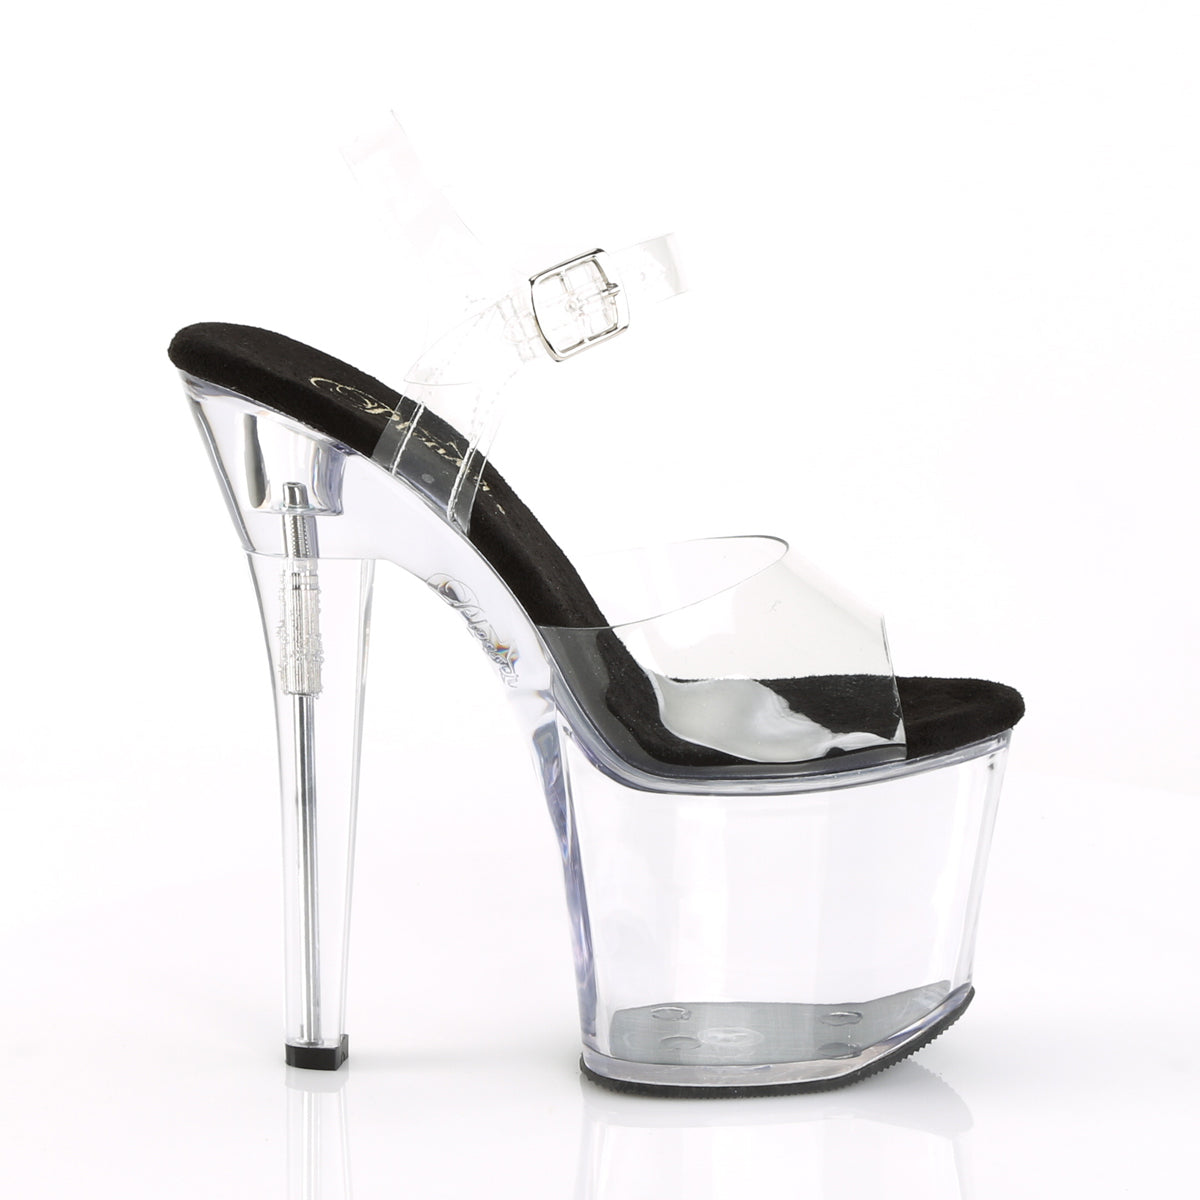 RADIANT-708 7" Heel Clear and Black Pole Dancing Platforms-Pleaser- Sexy Shoes Fetish Heels